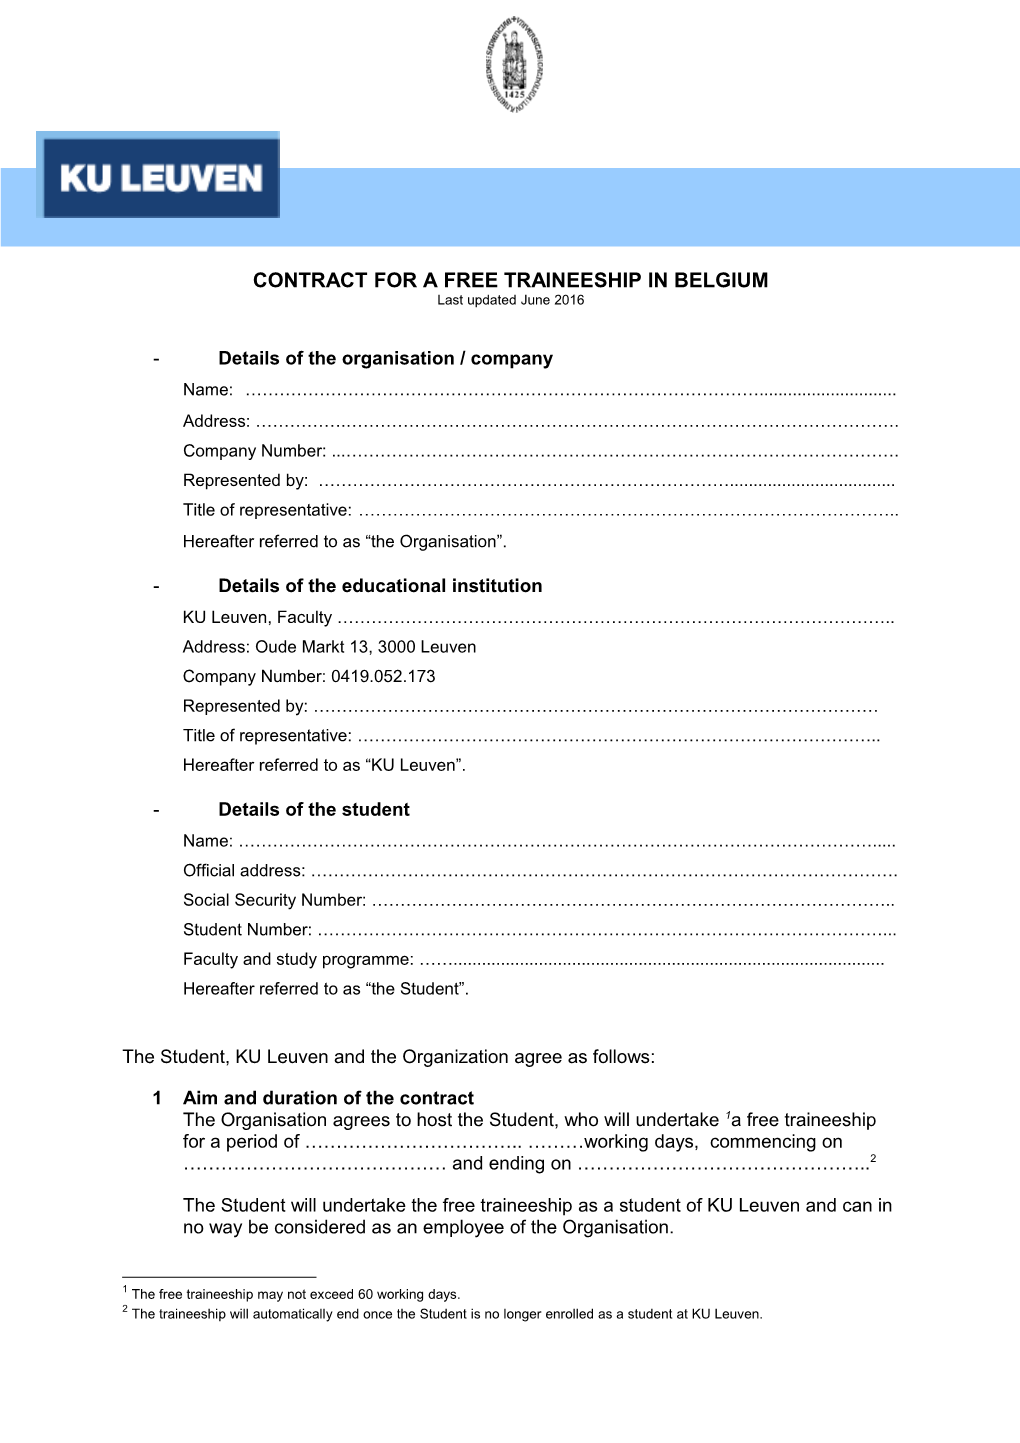 Contract for a Free Traineeship in Belgium